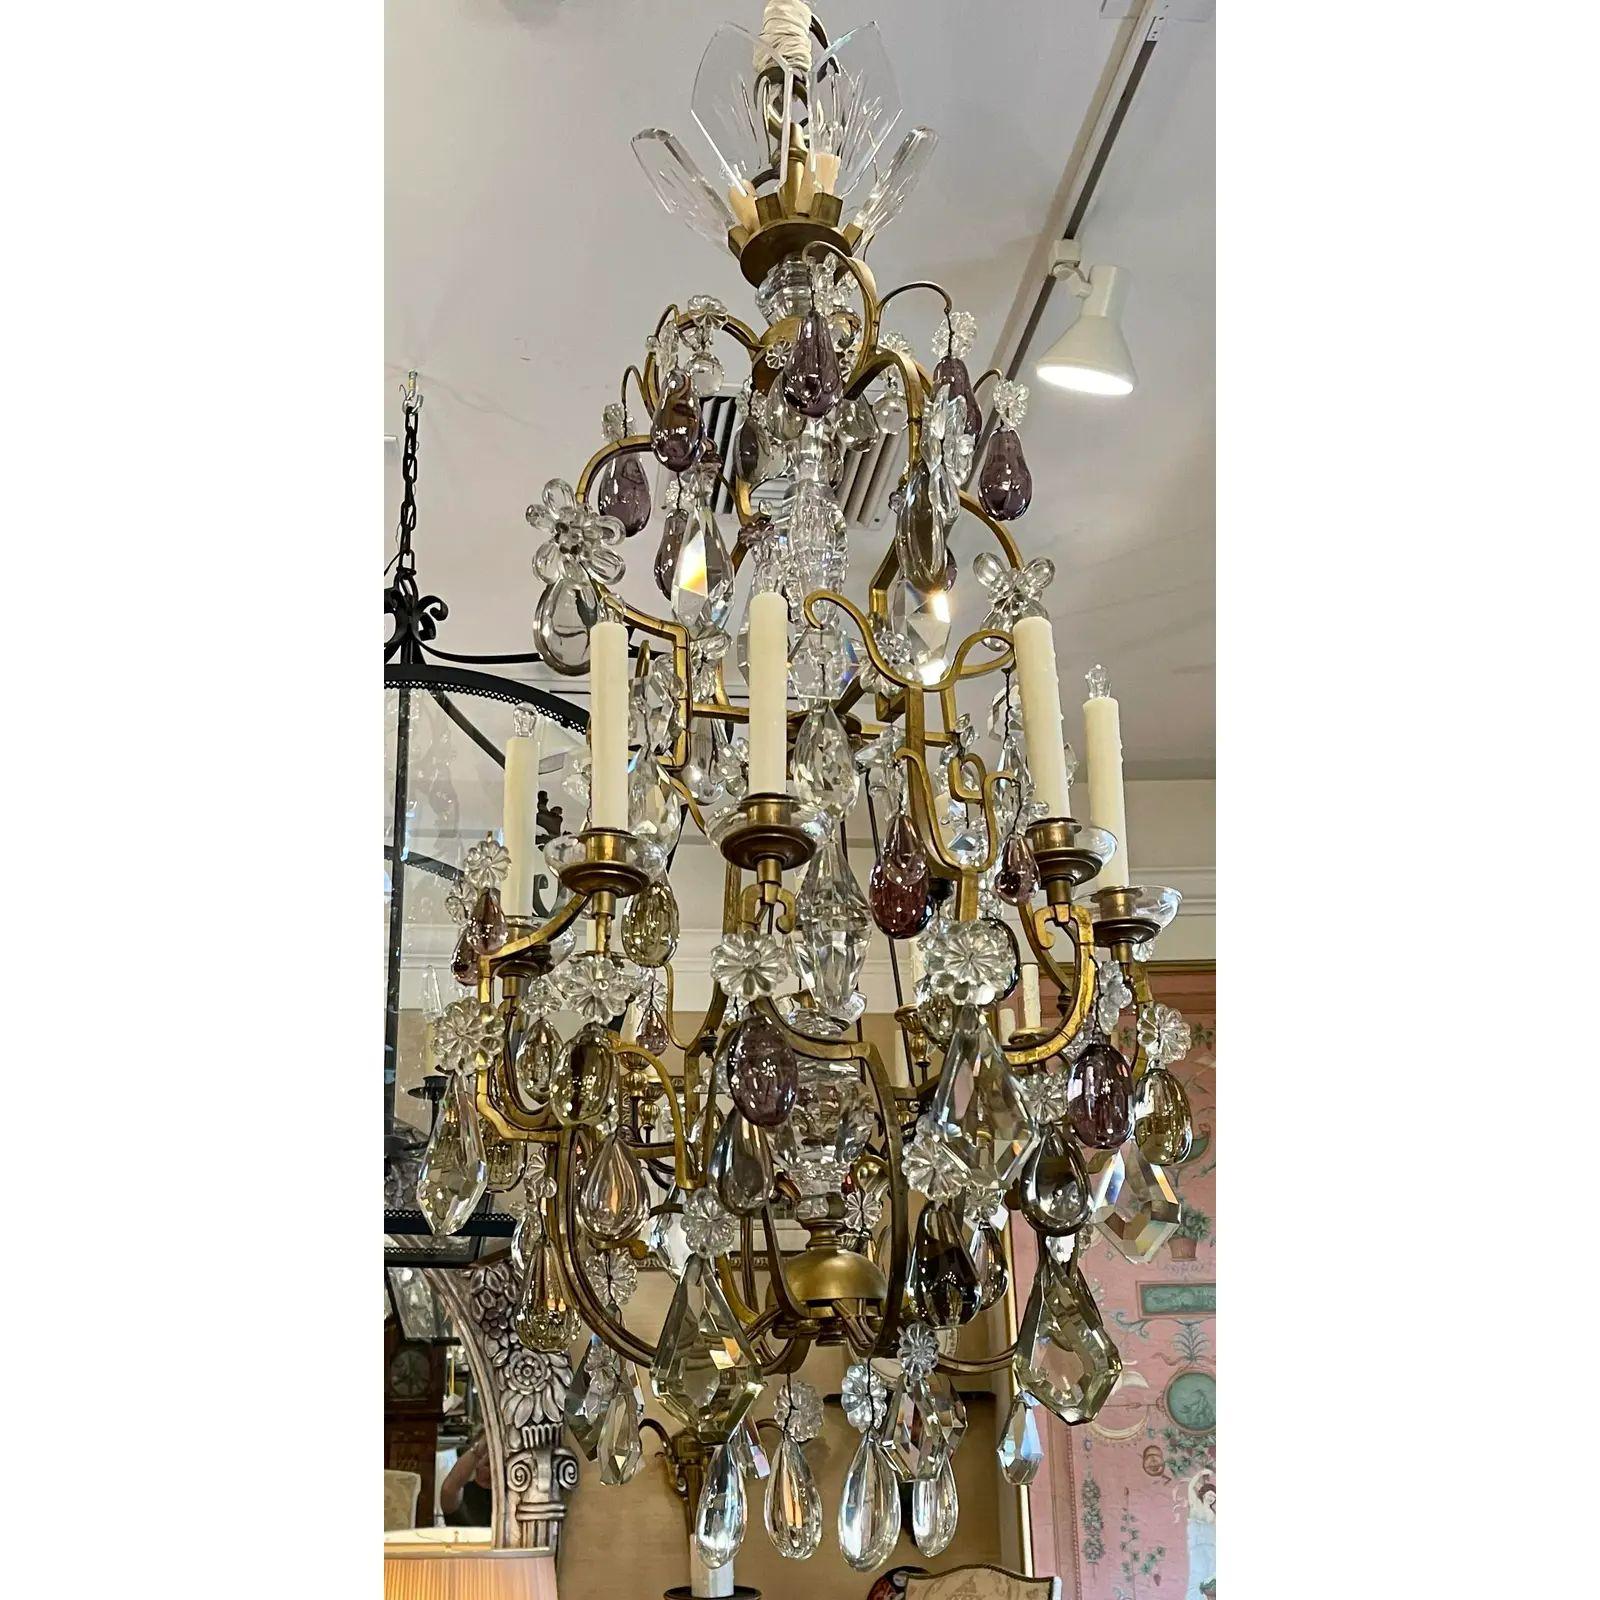 Antique Italian Rock crystal chandelier w purple fruit

Additional information: 
Materials: Crystal
Color: Gold
Period: 19th Century
Styles: Italian
Power Sources: Up to 120V (US Standard), Hardwired
Item Type: Vintage, Antique or